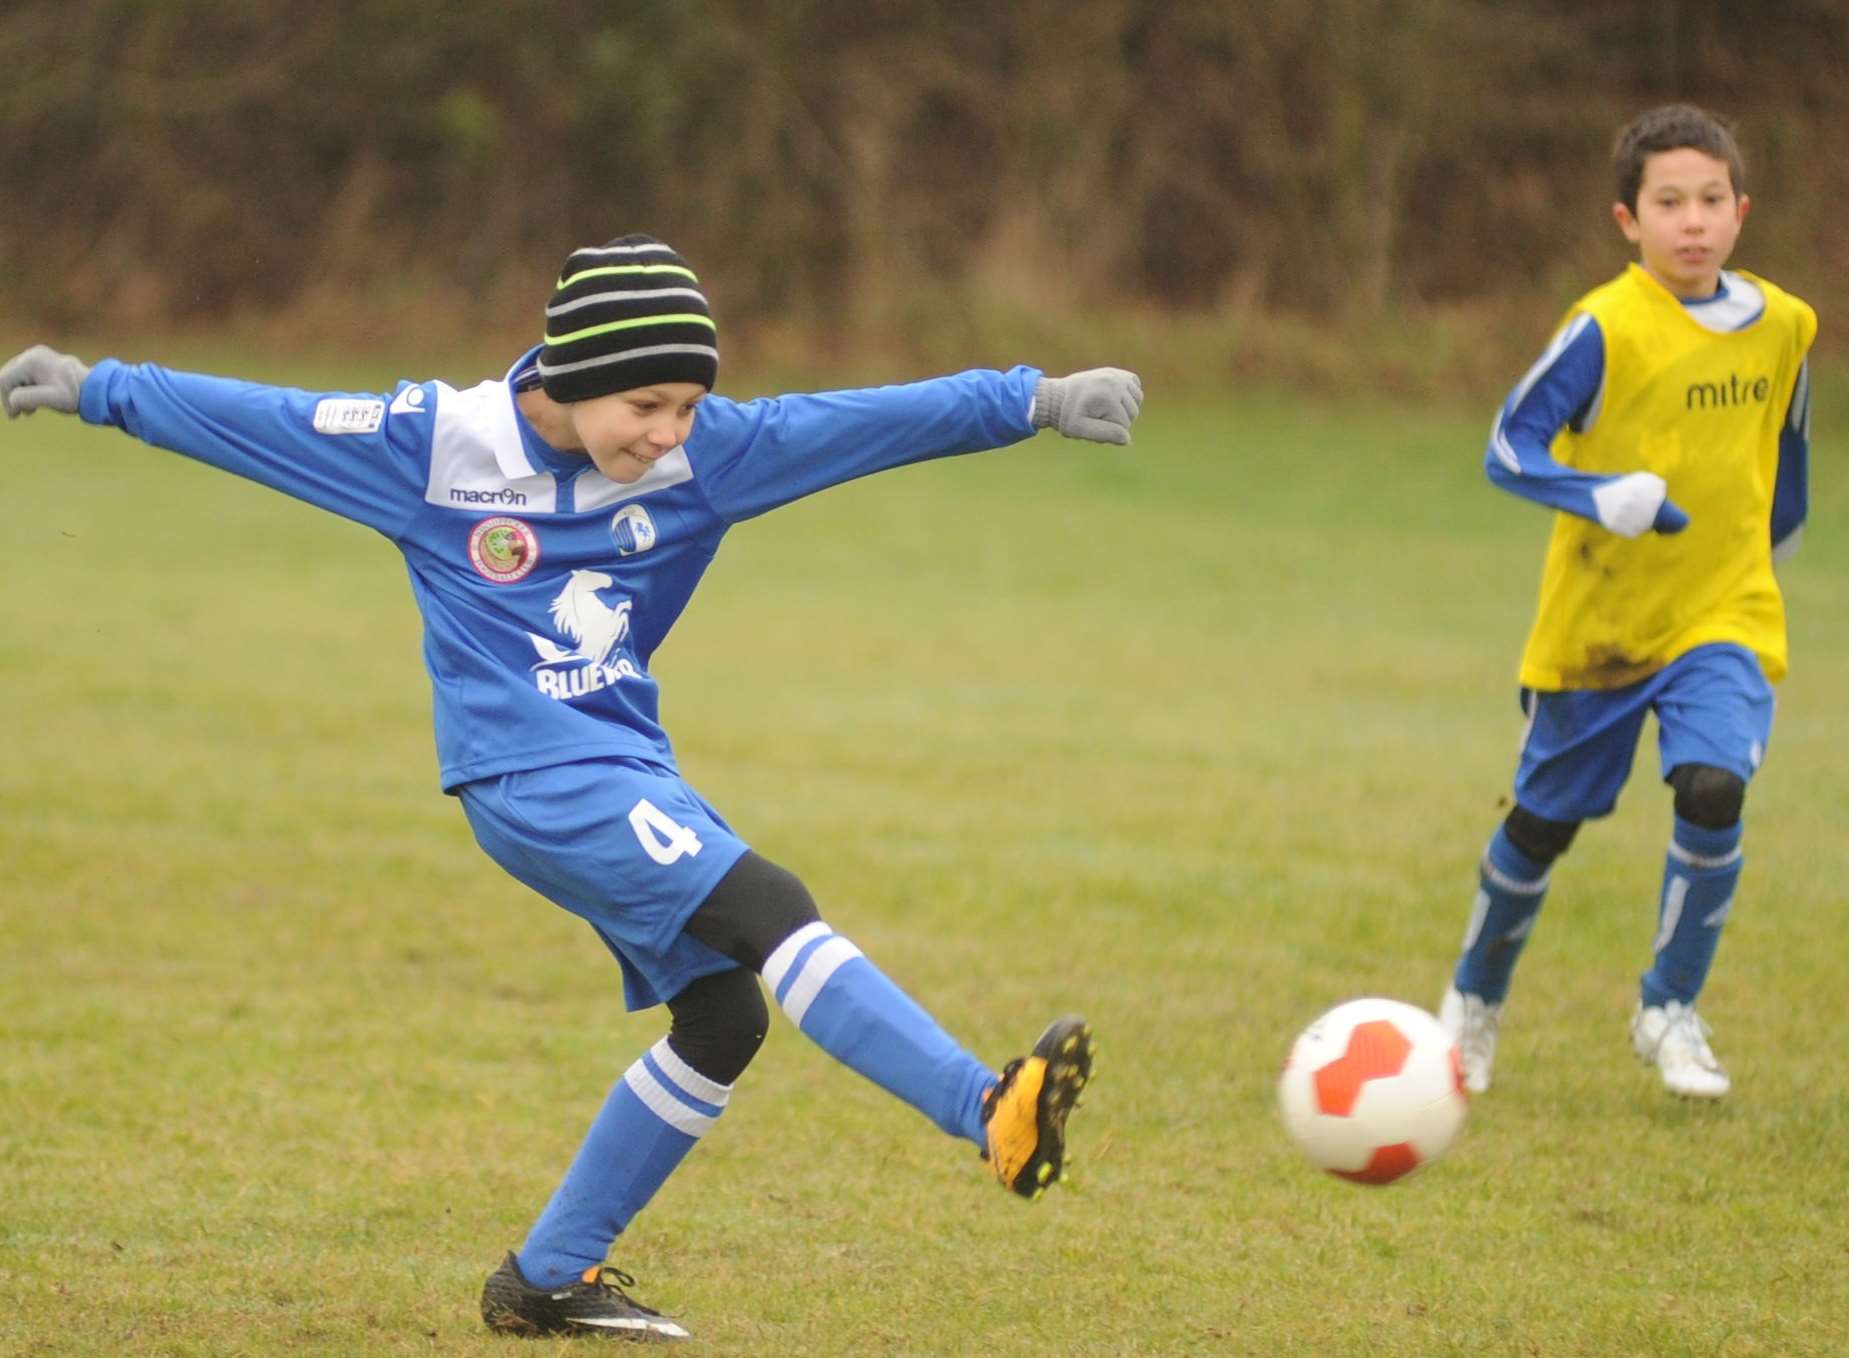 KFU Woodpecker under-9s try their luck against New Road Picture: Steve Crispe